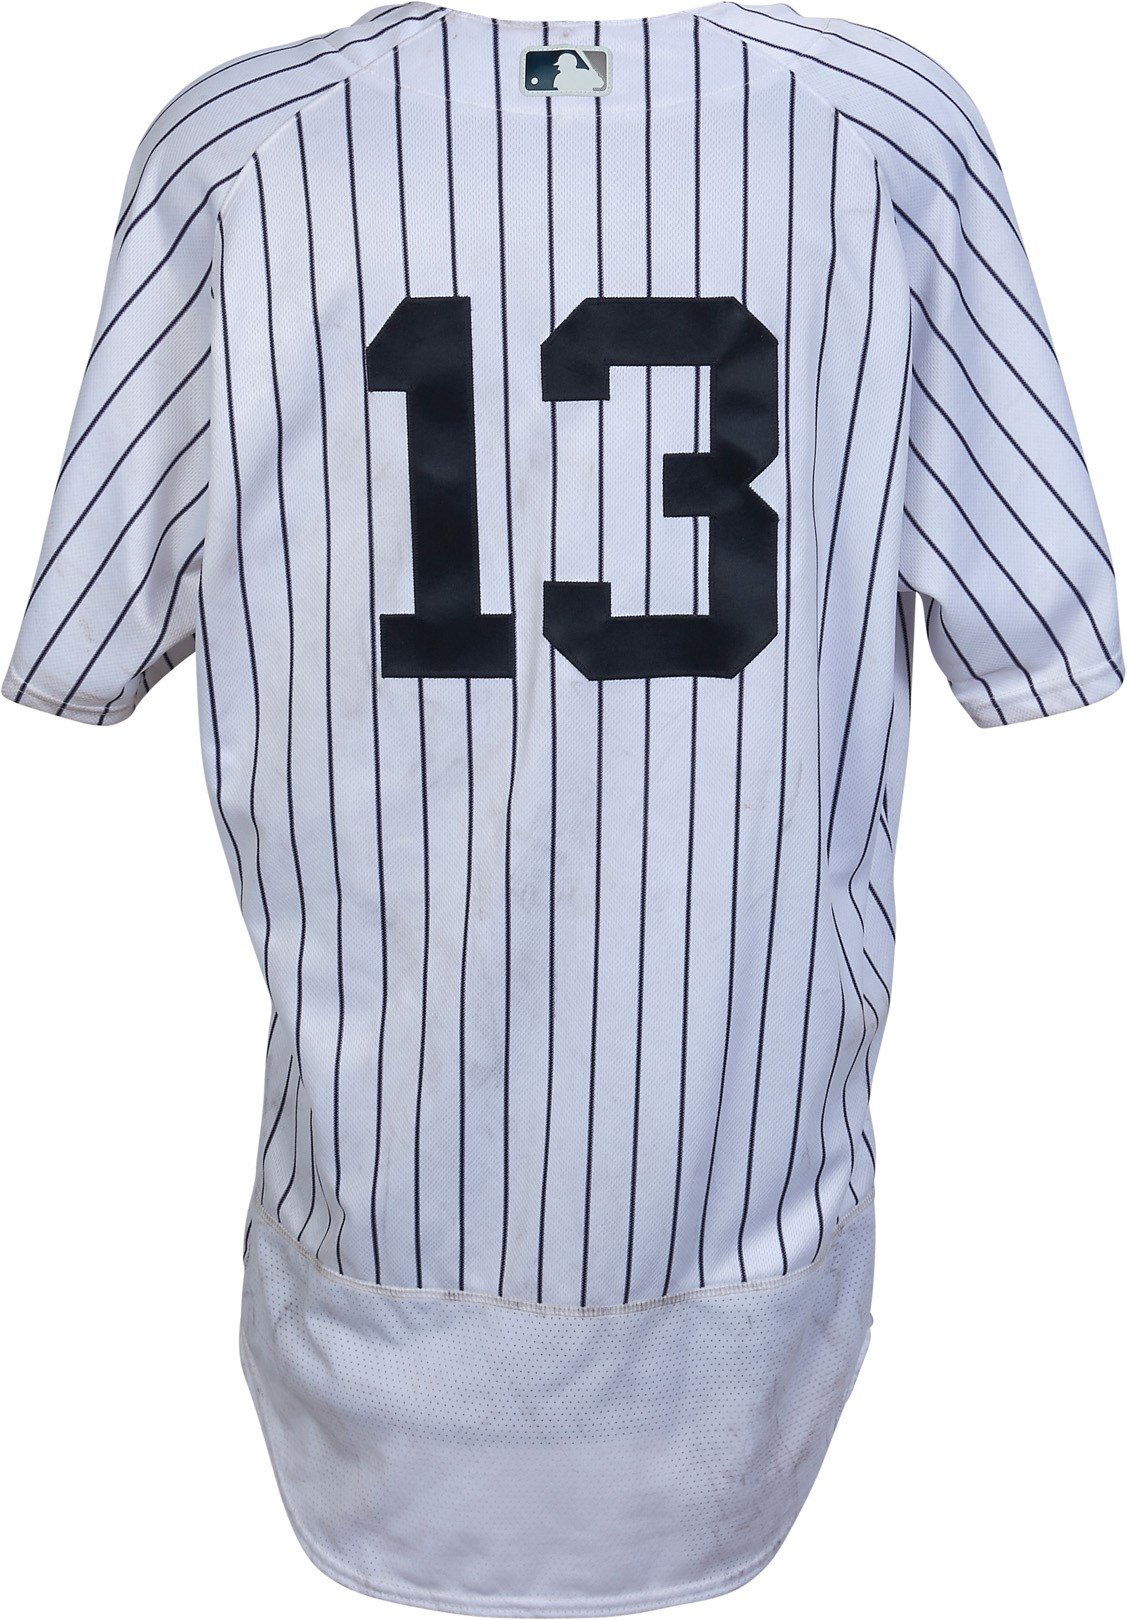 NY Yankees, Giants & Mets - 2016 Opening Day Alex Rodriguez Game Worn Yankees Jersey - Final Season (Steiner LOA & Photo-Matched)